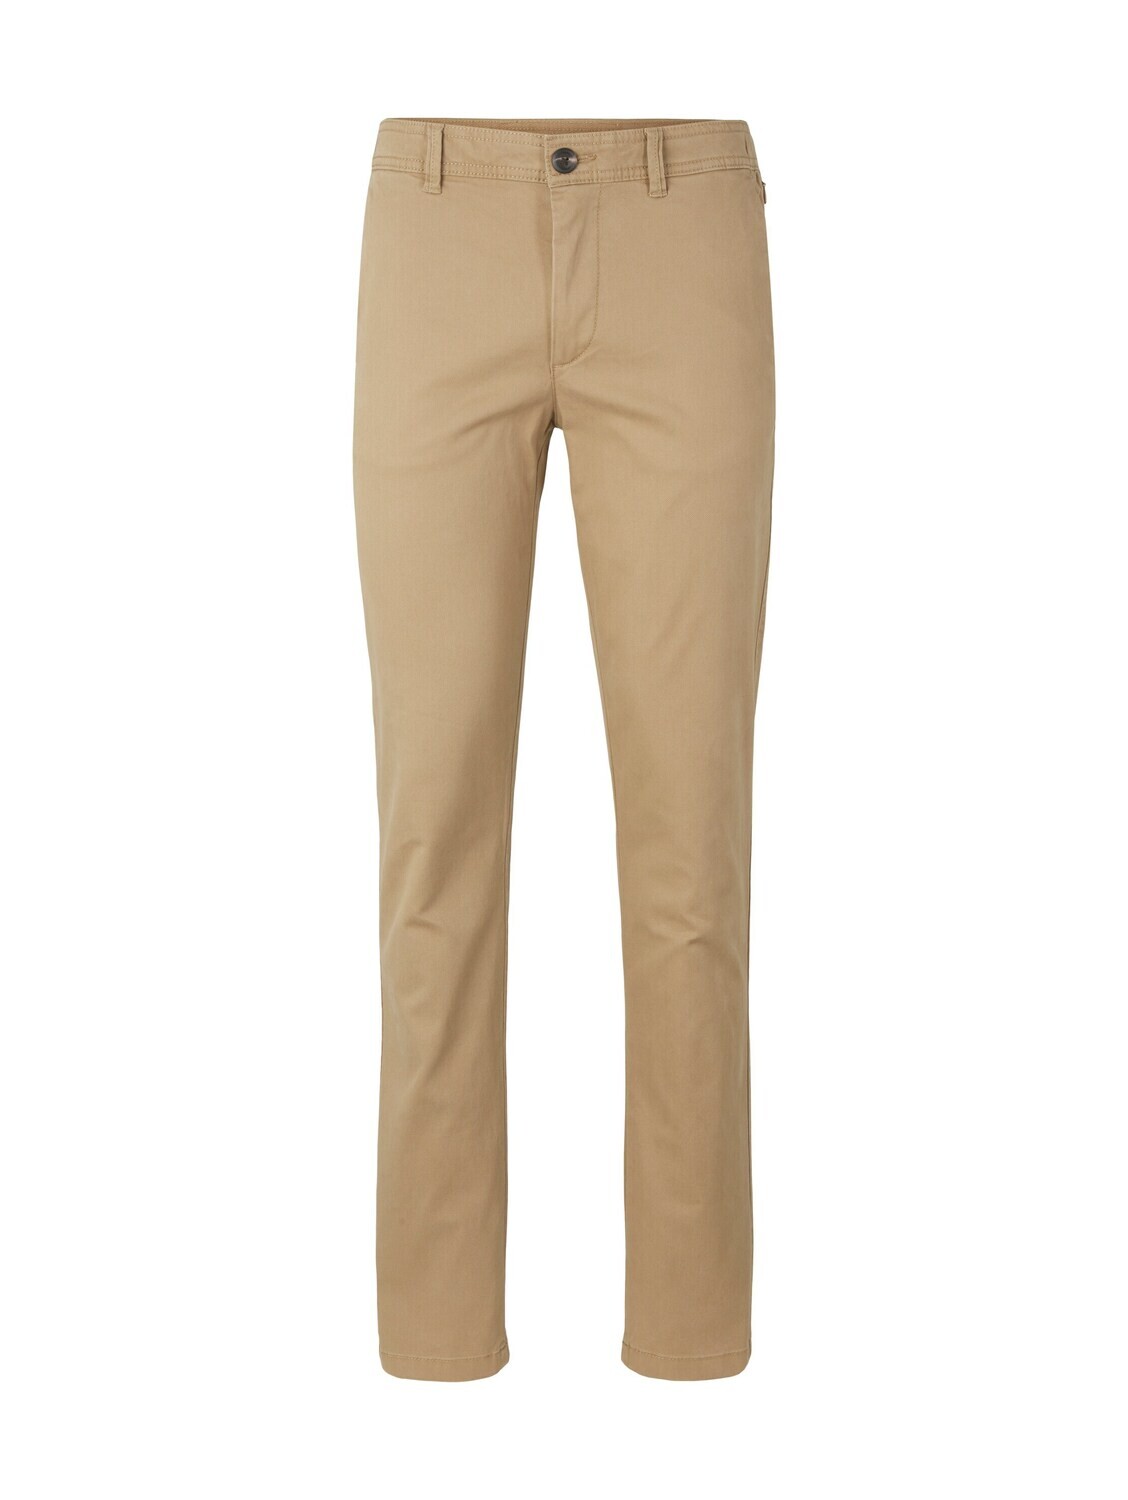 Tom Tailor chino slim fit, everglade beige, Size: 30"32"